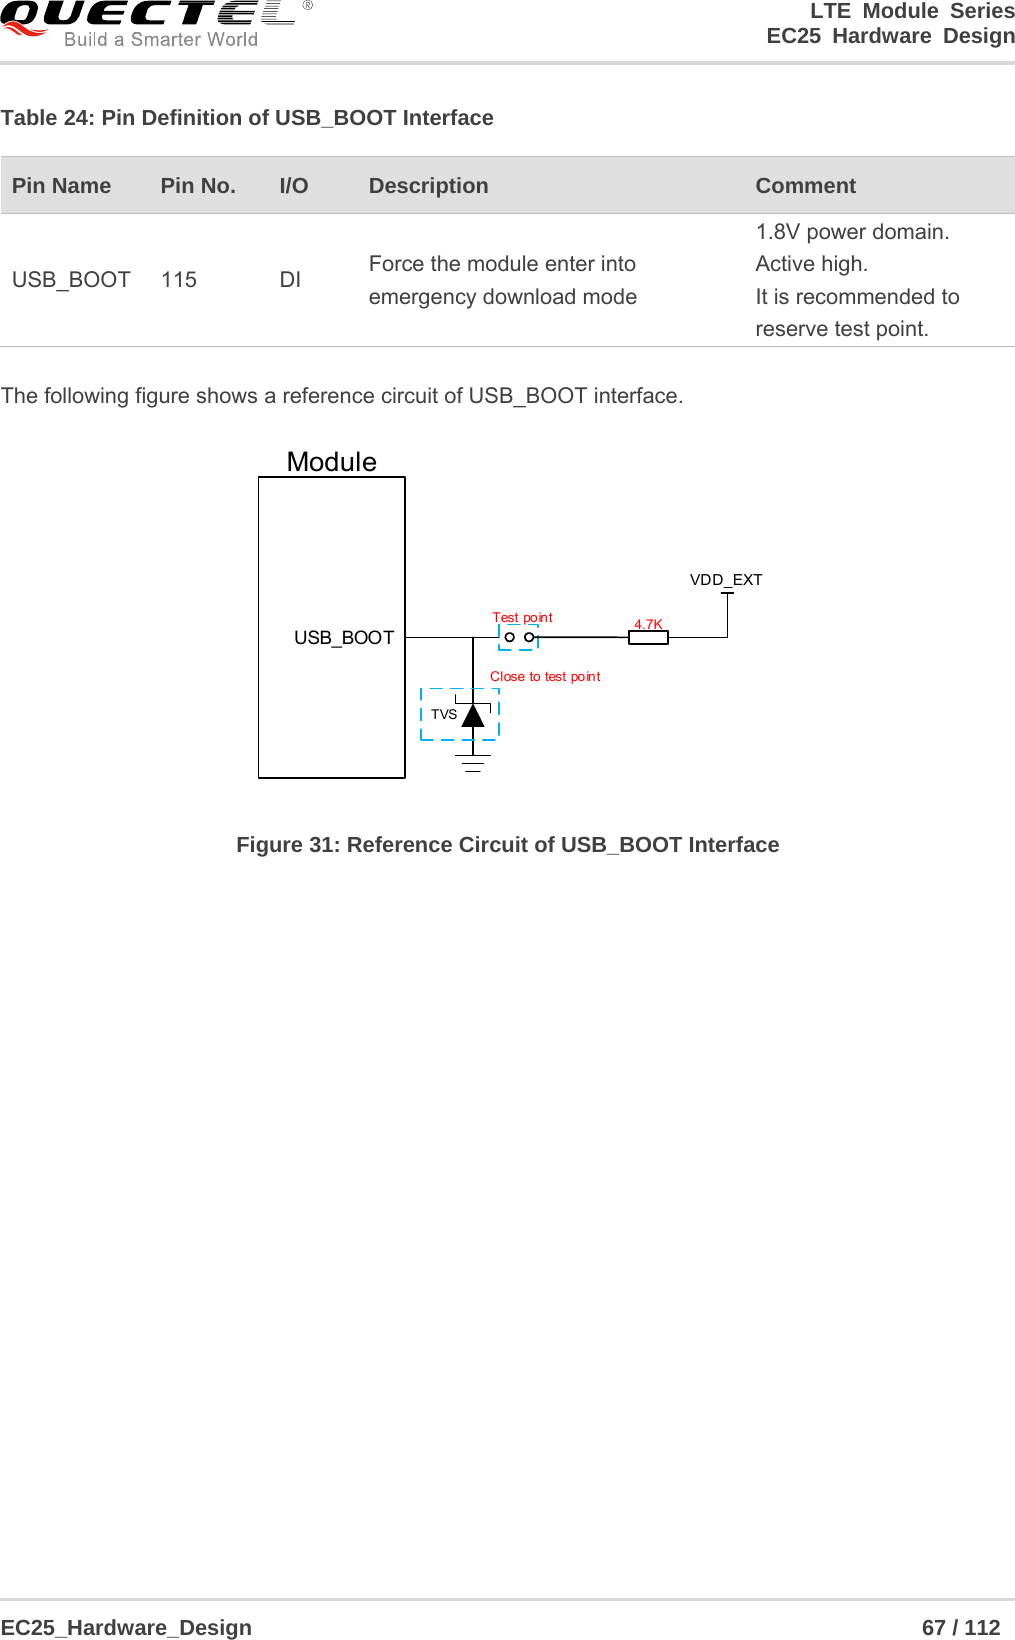 LTE Module Series                                                  EC25 Hardware Design  EC25_Hardware_Design                                                             67 / 112    Table 24: Pin Definition of USB_BOOT Interface  The following figure shows a reference circuit of USB_BOOT interface. ModuleUSB_BOOTVDD_EXT4.7KTest pointTVSClose to test po int Figure 31: Reference Circuit of USB_BOOT Interface  Pin Name    Pin No.  I/O  Description   Comment USB_BOOT 115  DI  Force the module enter into emergency download mode 1.8V power domain. Active high. It is recommended to reserve test point. 